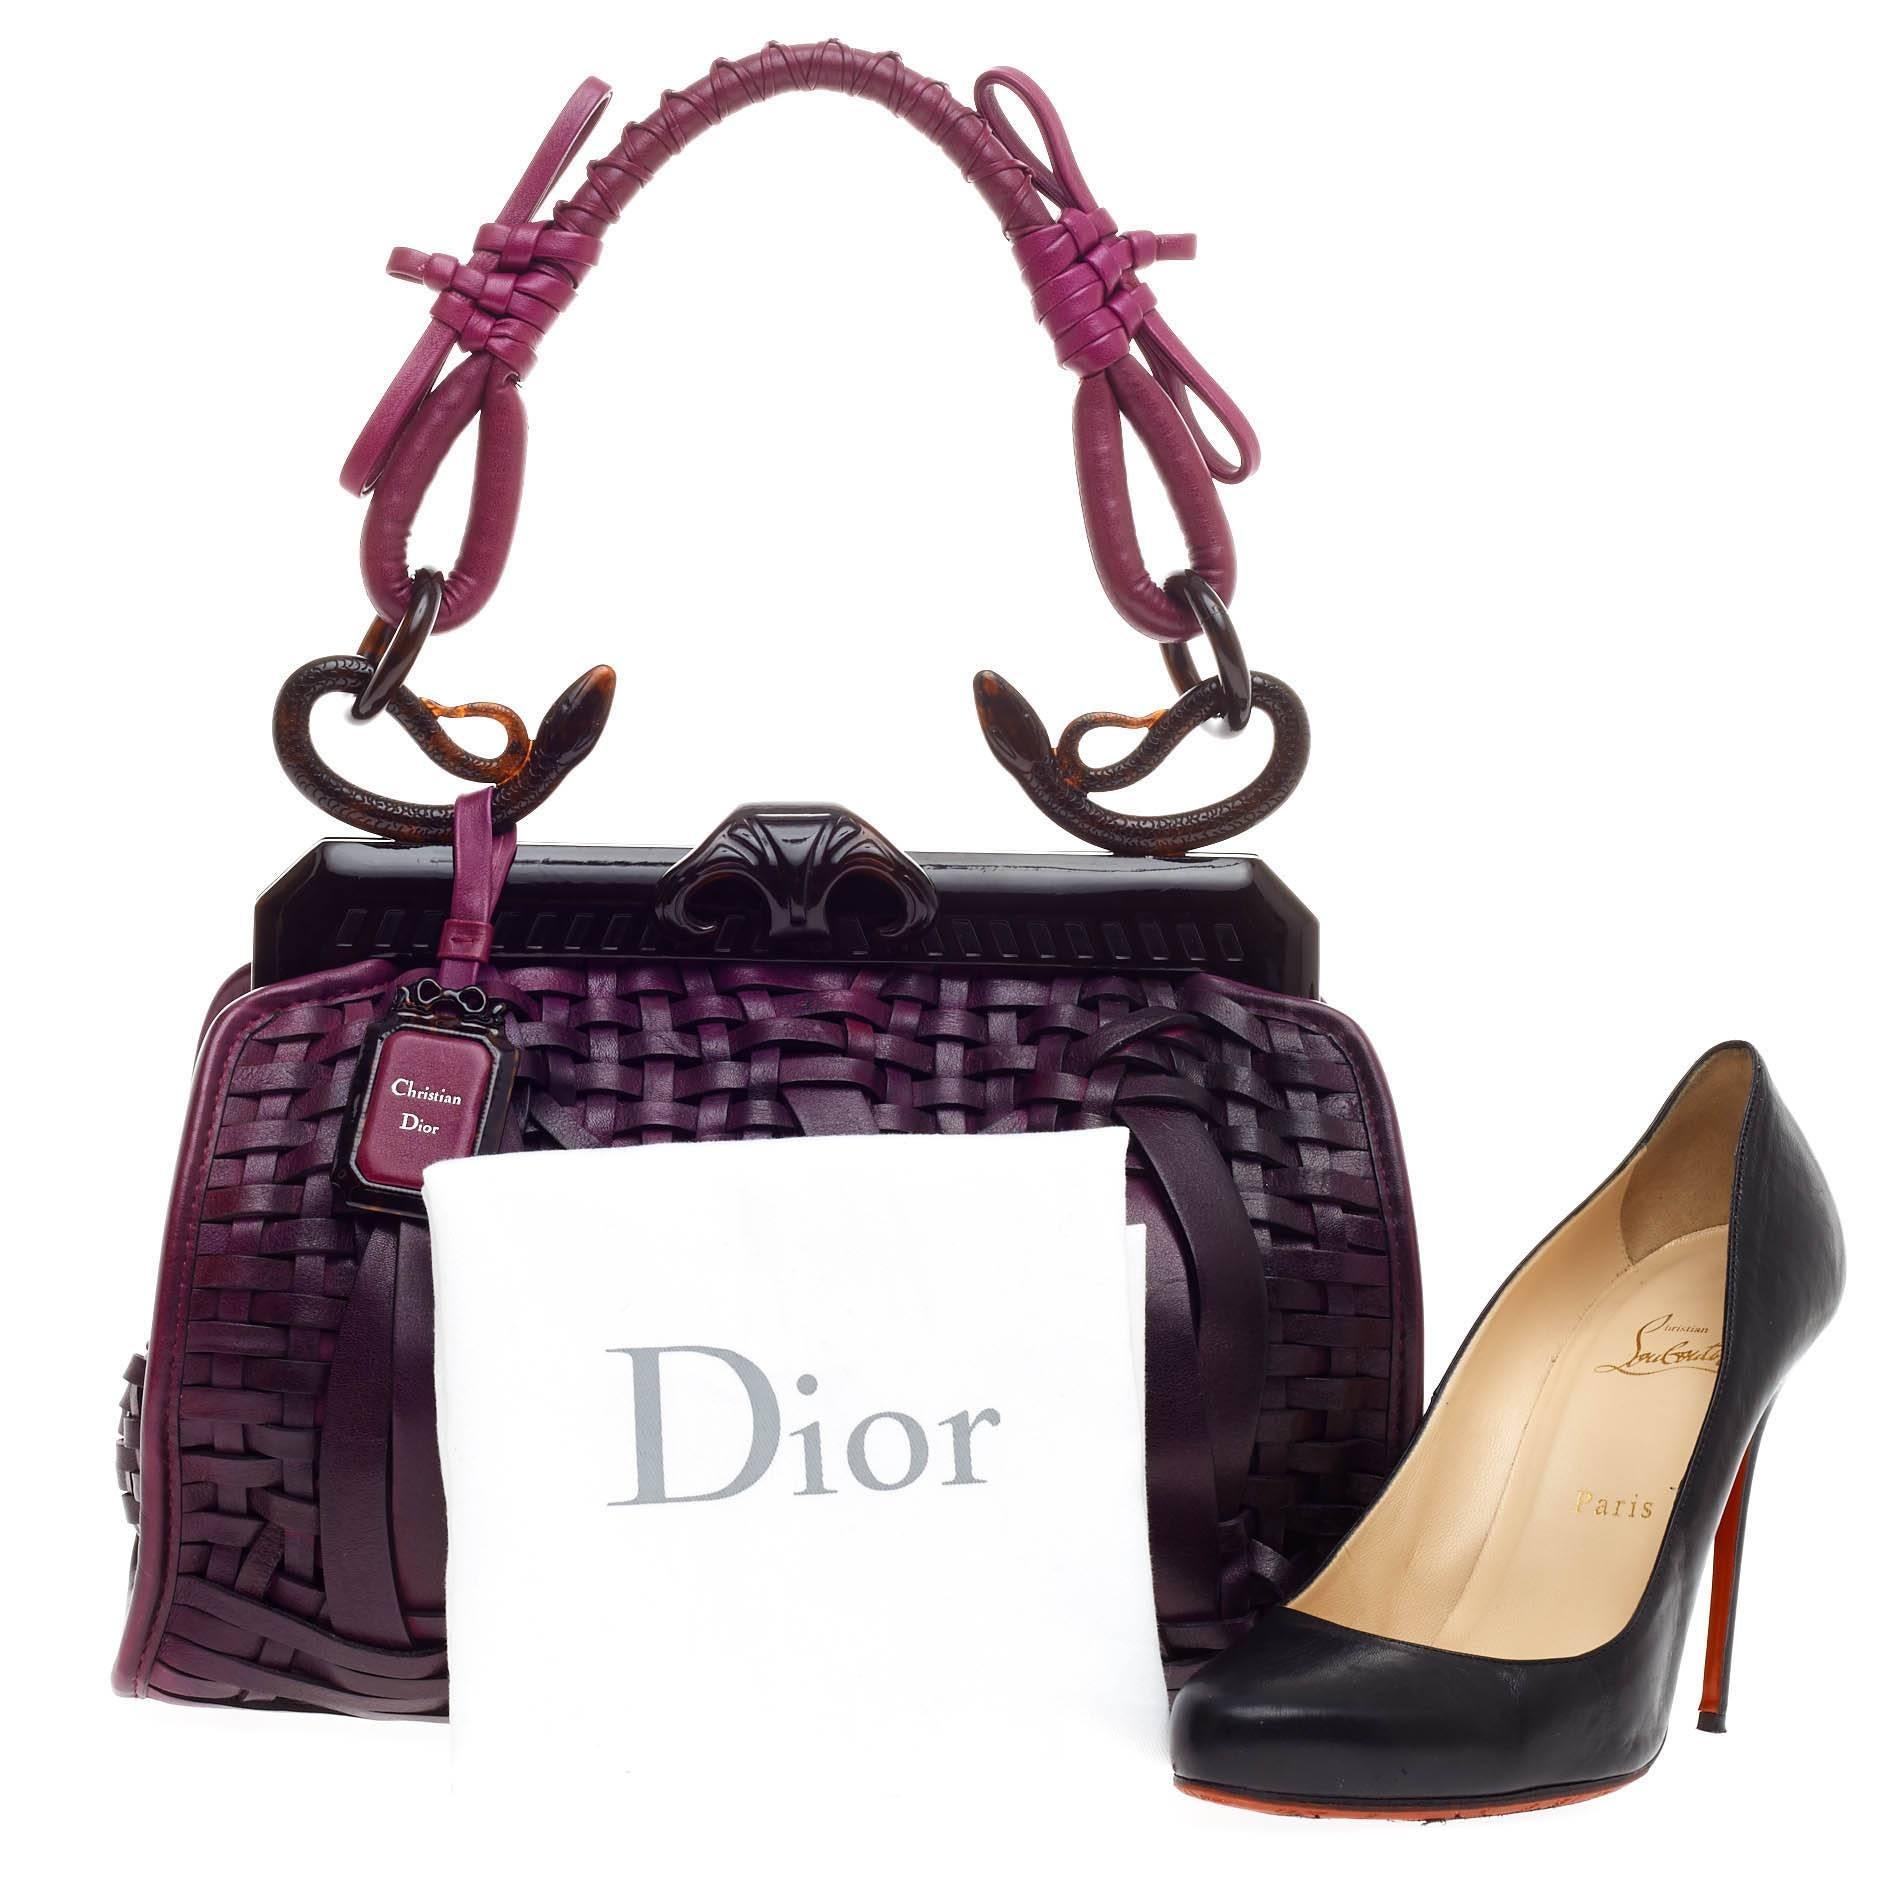 This authentic Christian Dior 1947 Samourai Bag Woven Leather Medium created for the brand's 60th Anniversary merges tieless elegance from the 1940's with definitive Japanese elements. Designed by John Galliano in degrade purple calfskin bladed and